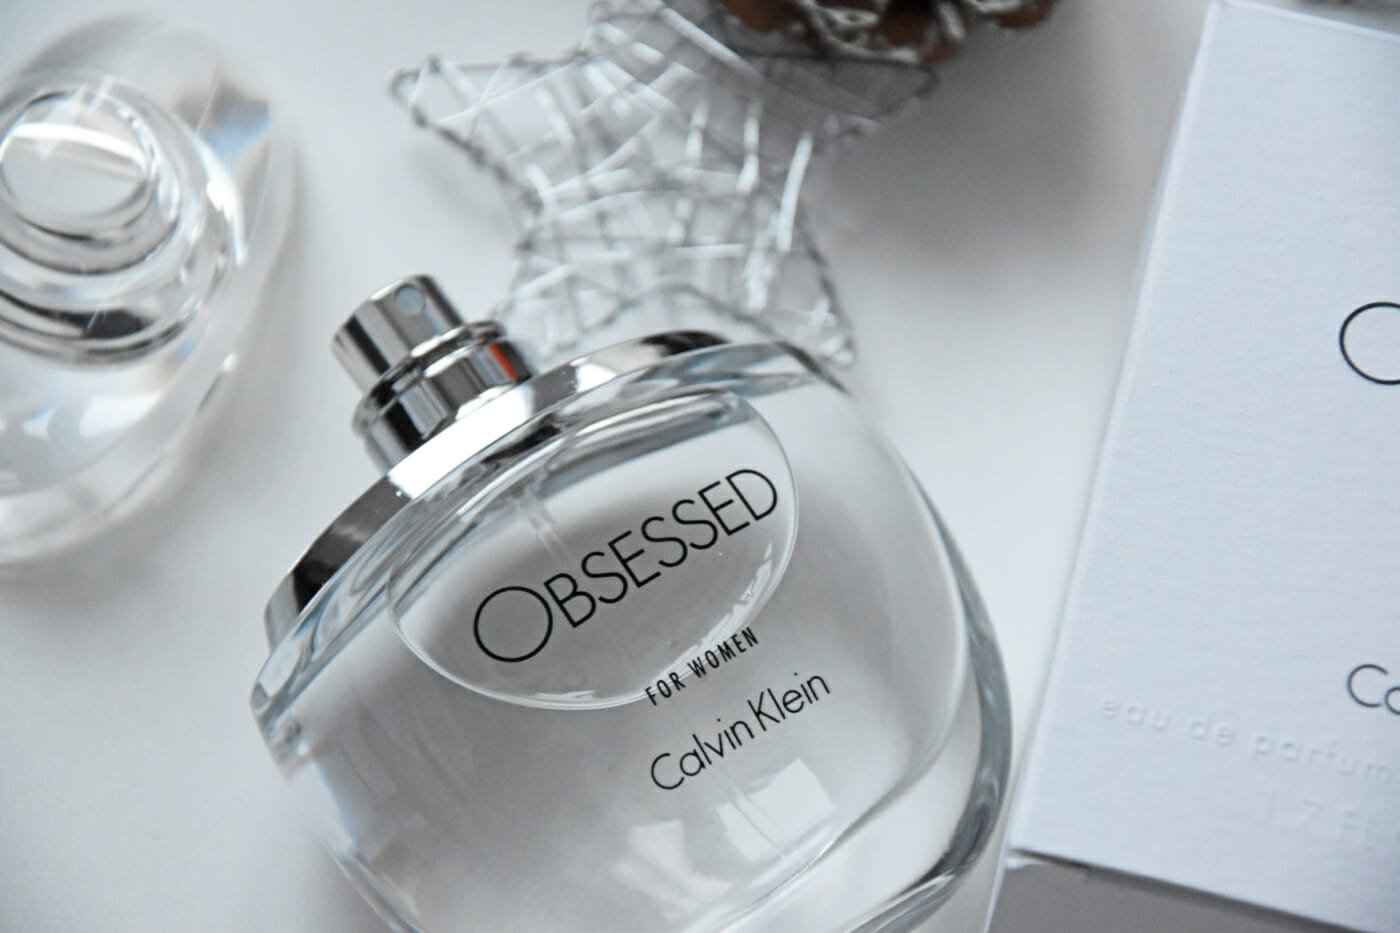 Obsessed Calvin Klein review